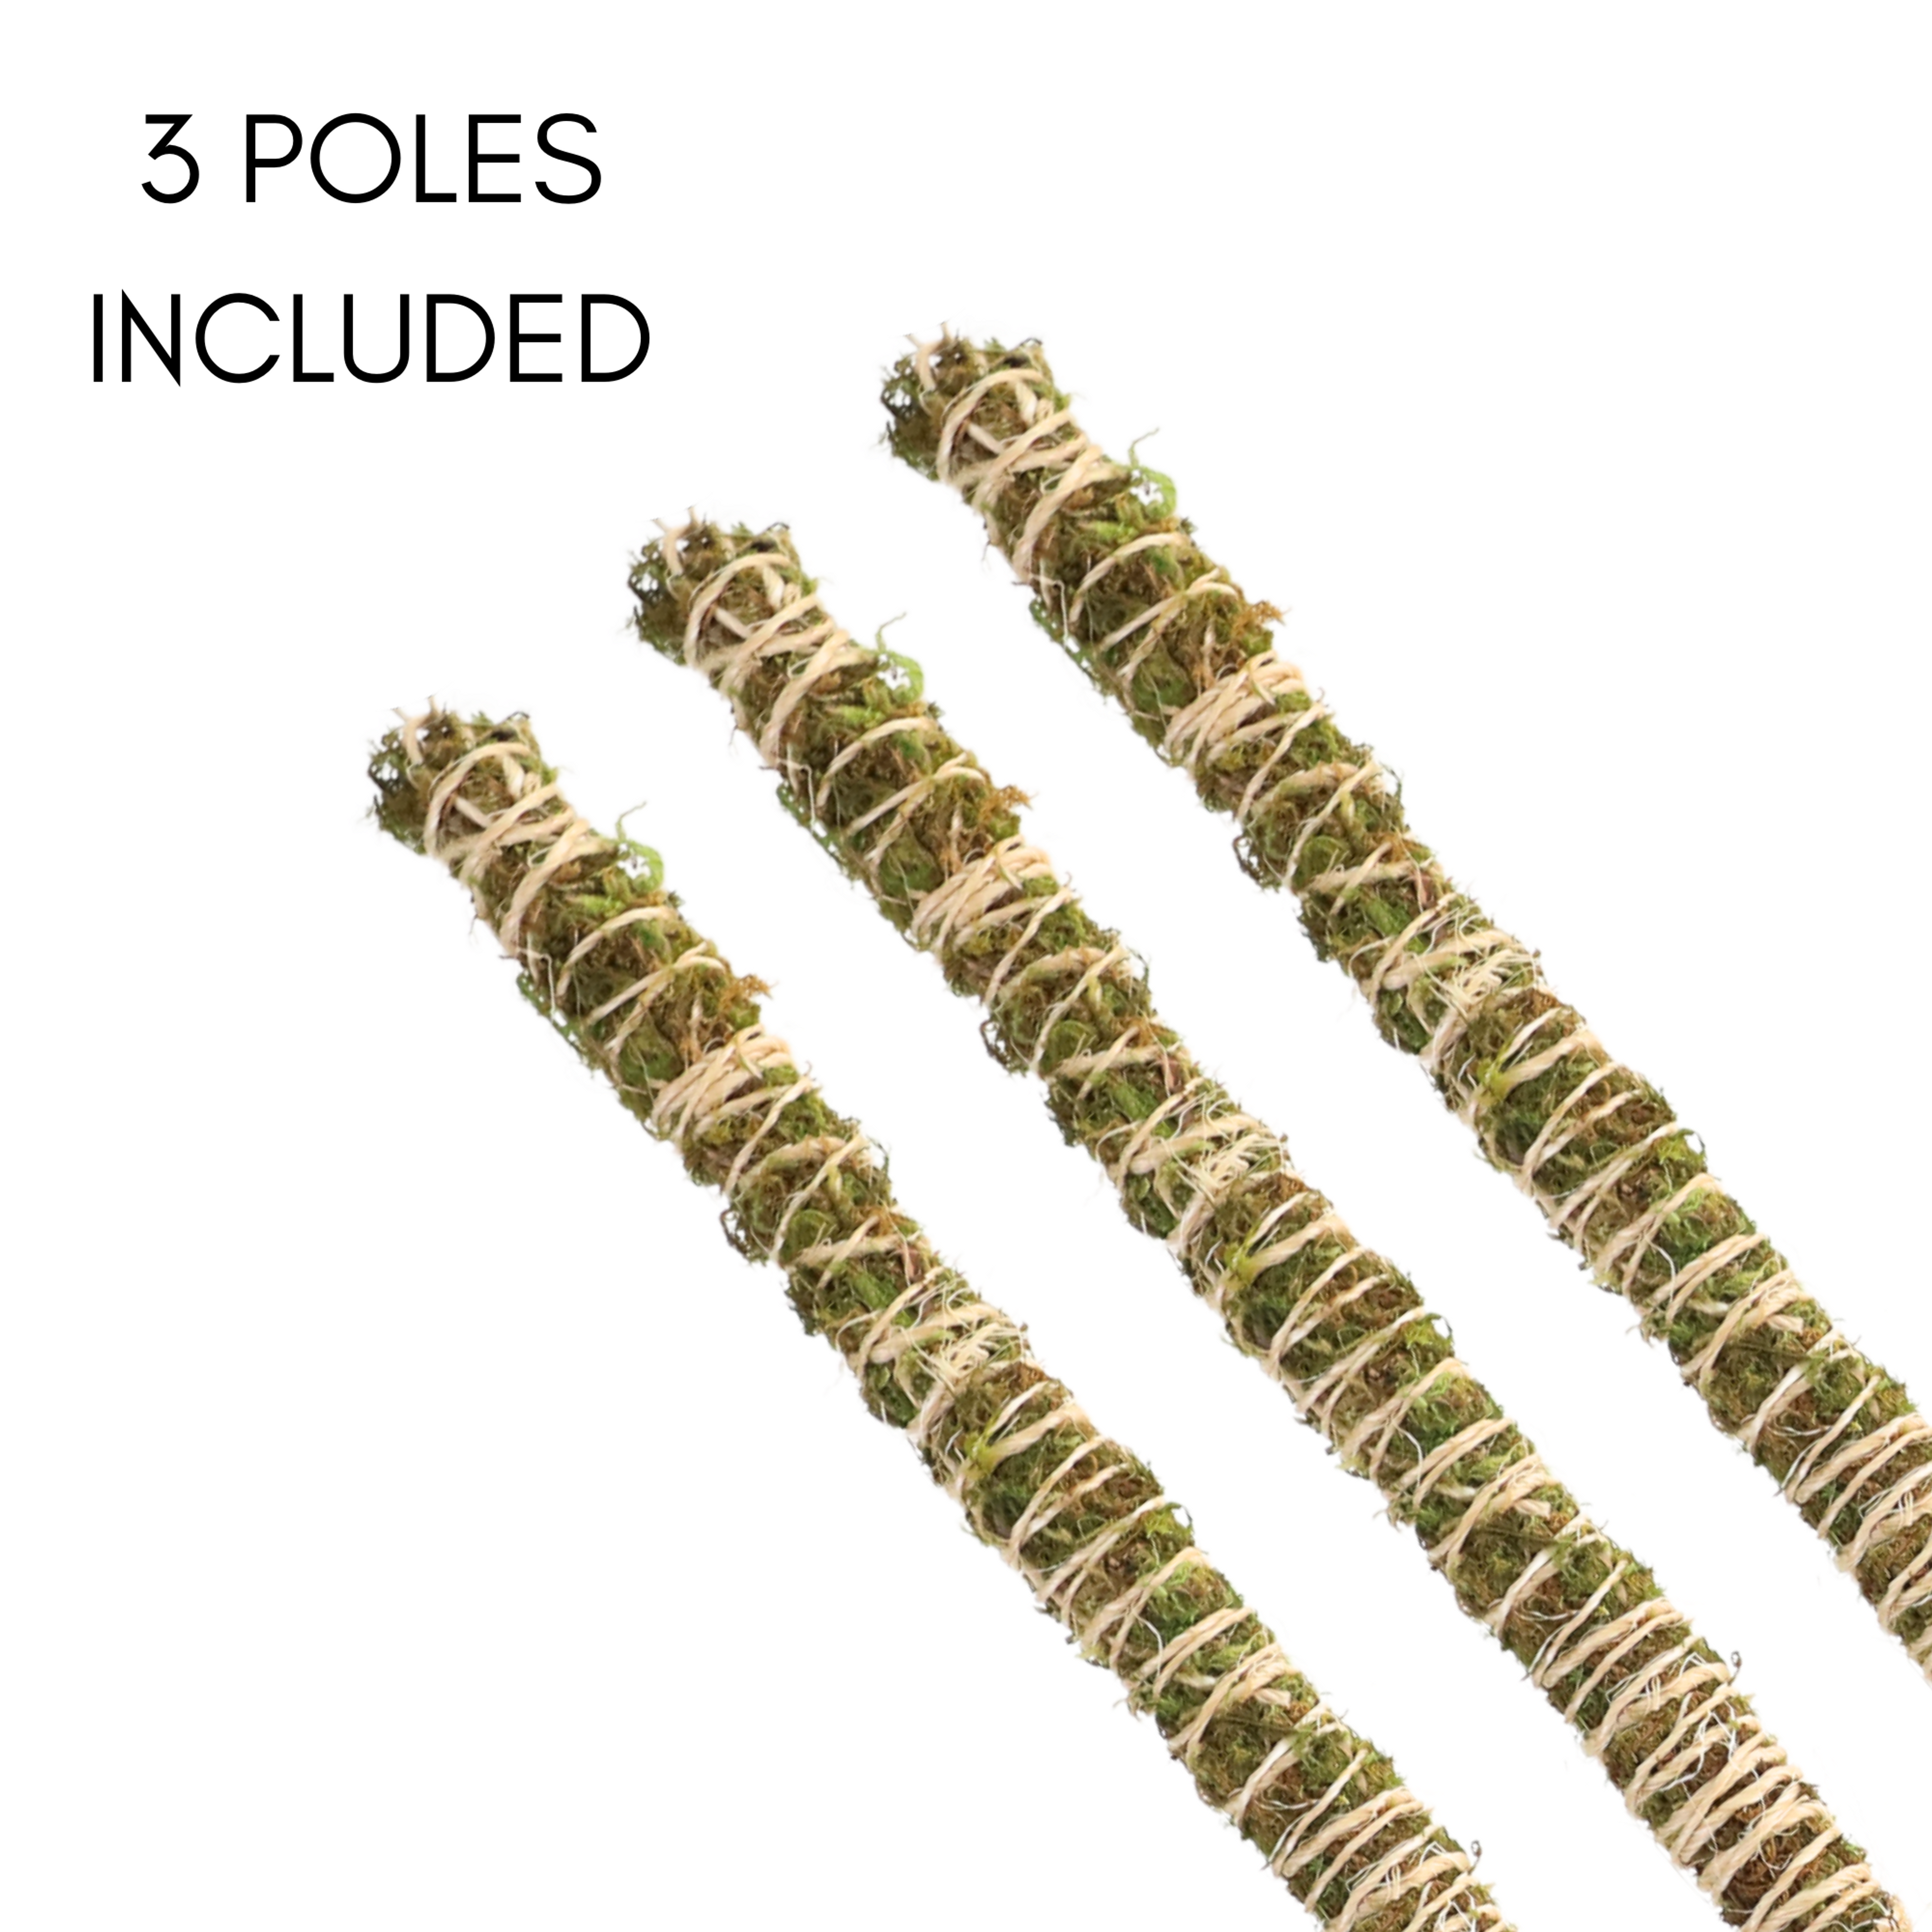 The Bendable Moss Pole THIN